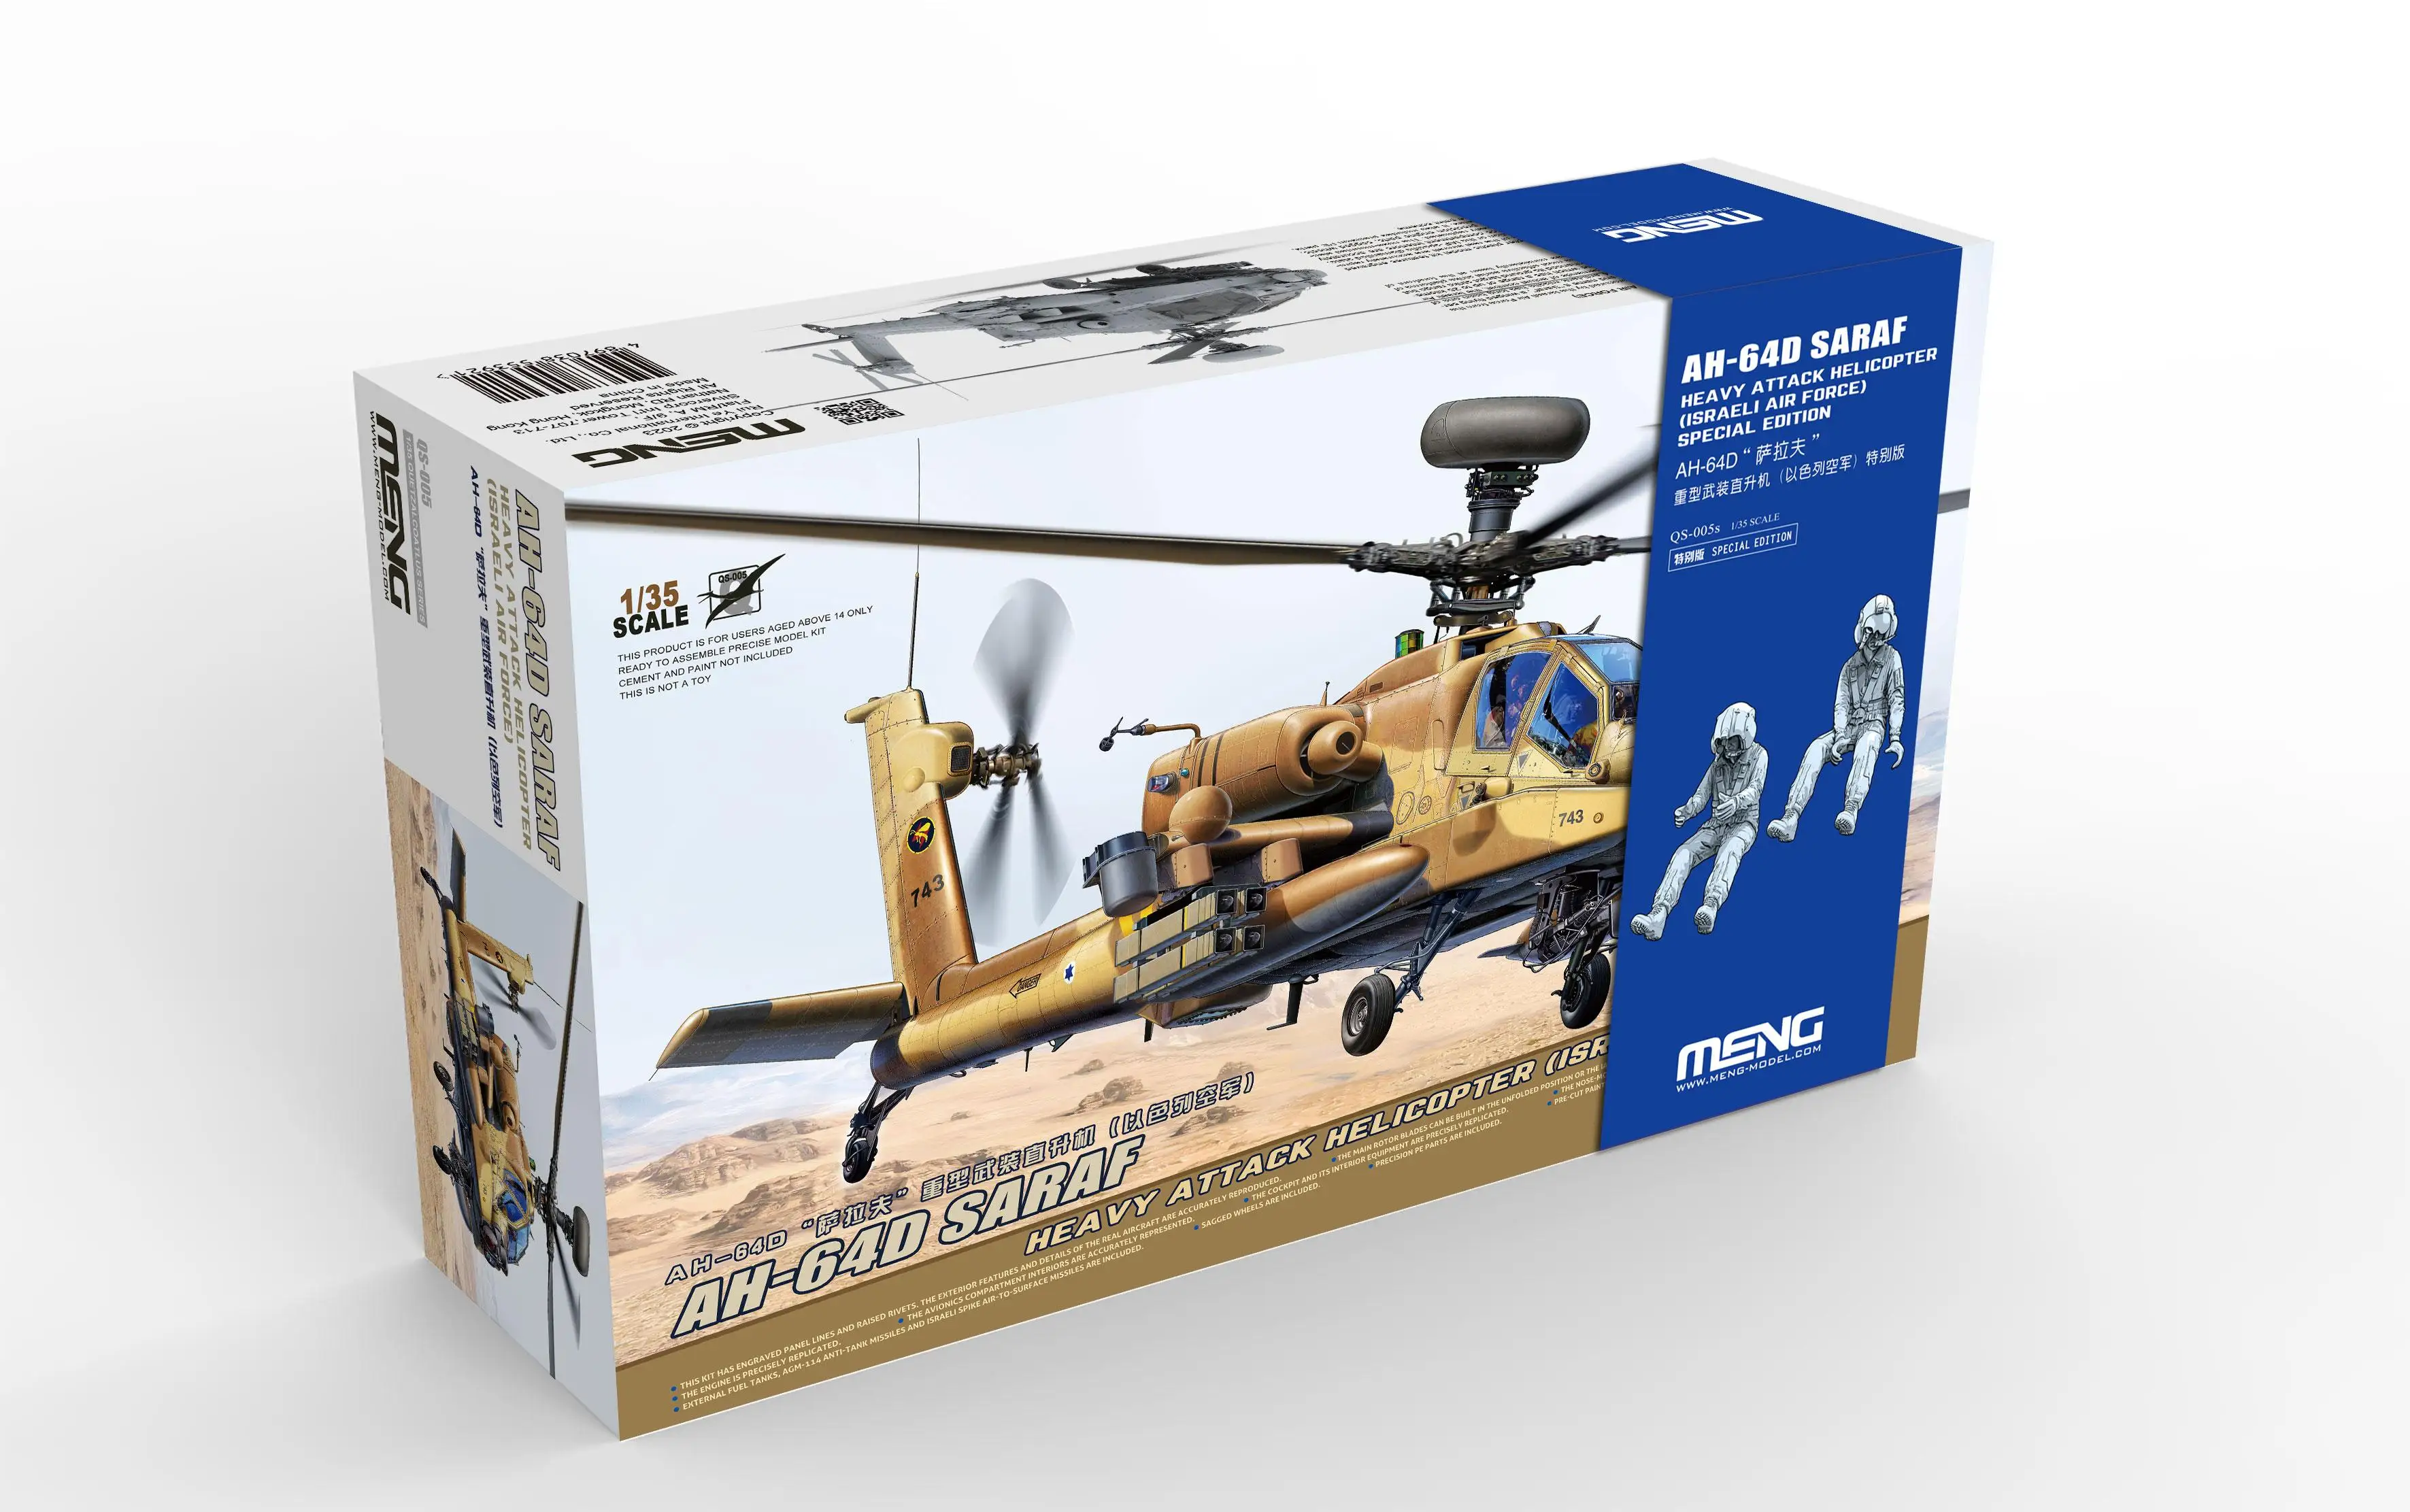 

MENG QS-005S 1/35 Scale AH-64D Saraf Heavy Attack Helicopter (Israeli Air Force) Special Version With Resin Figures